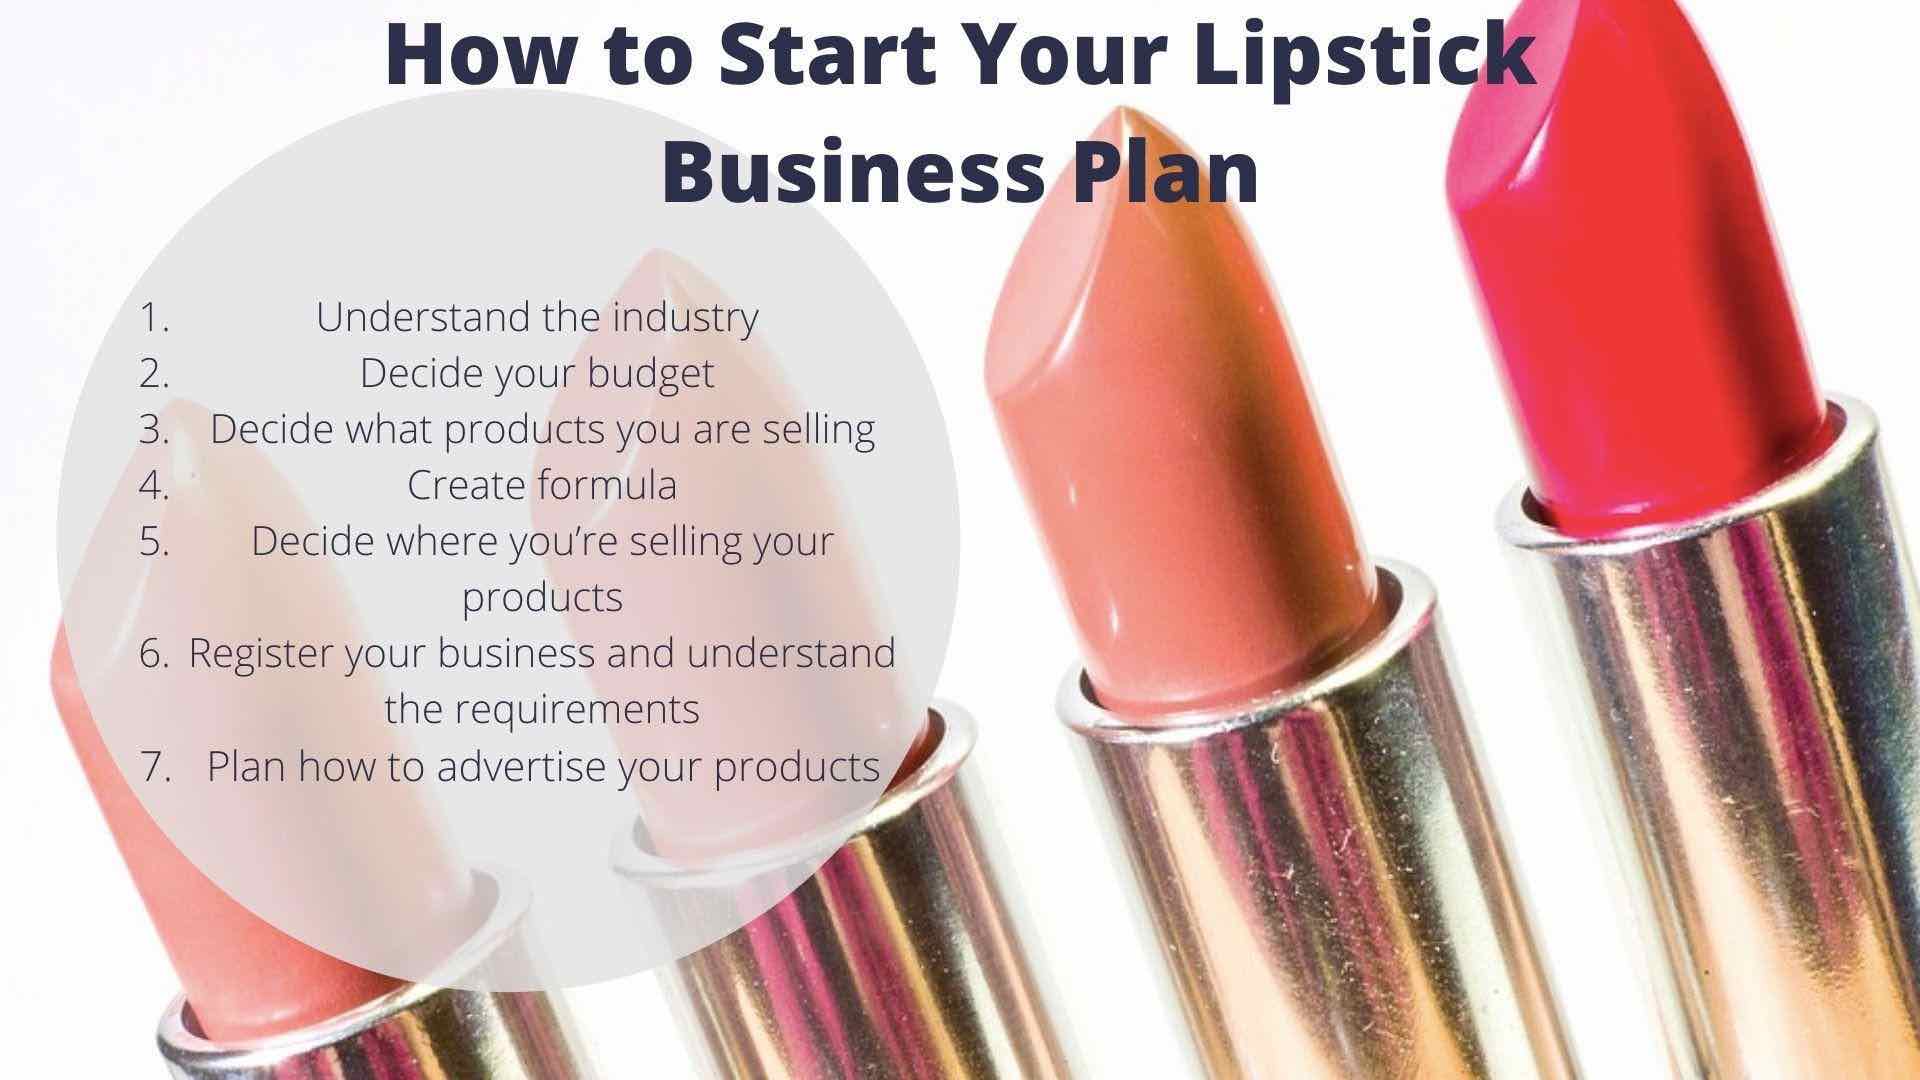 How to start your own lipstick business